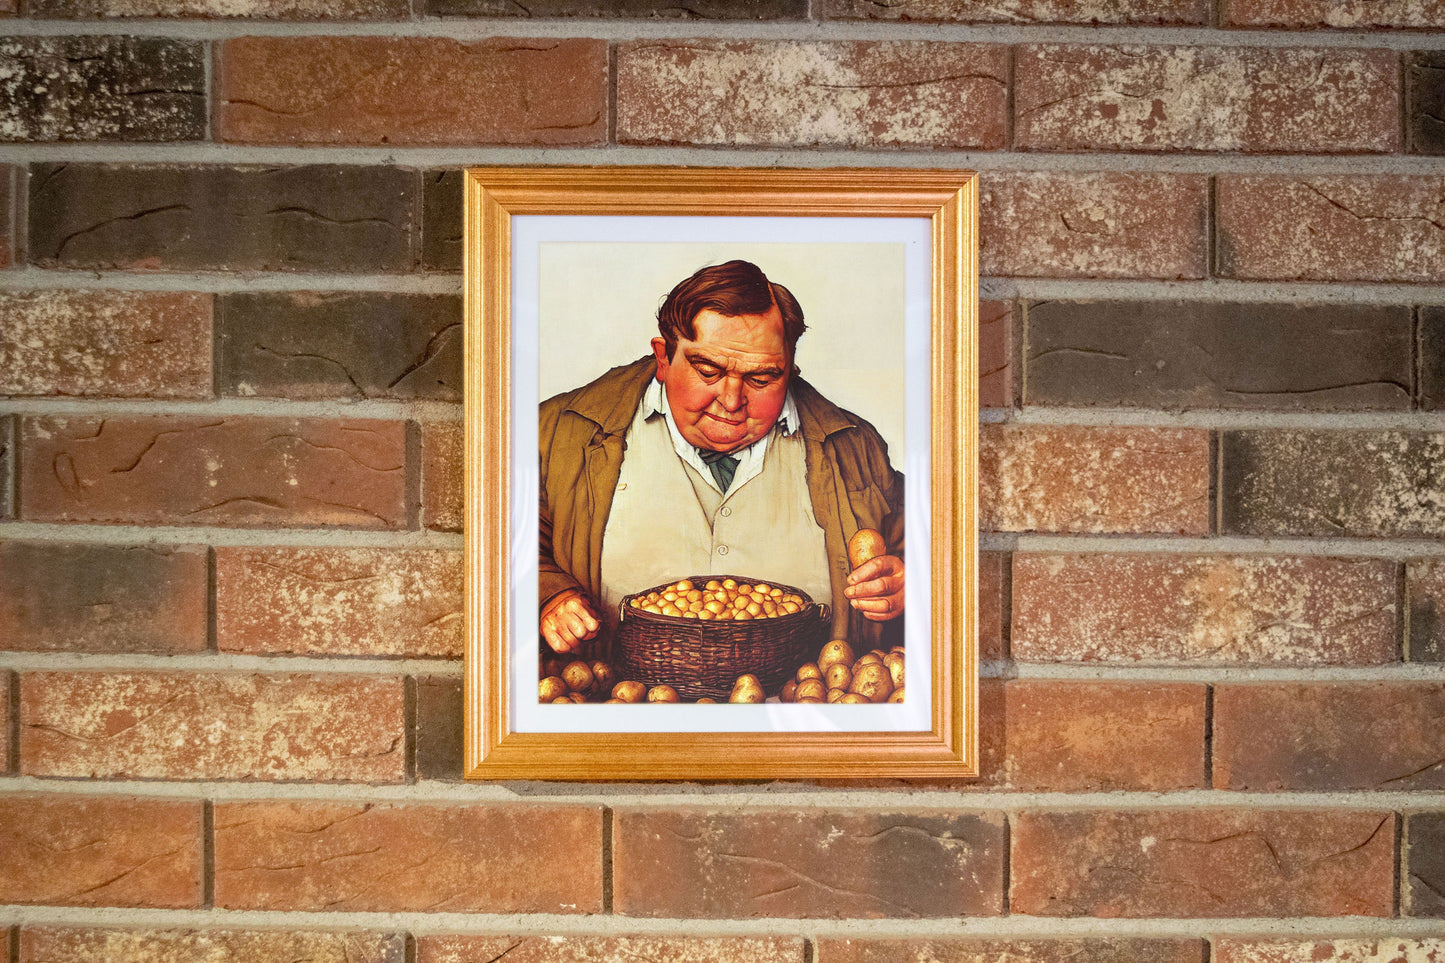 Portrait of F. Nephi Grigg, Inventor of the Tater Tot